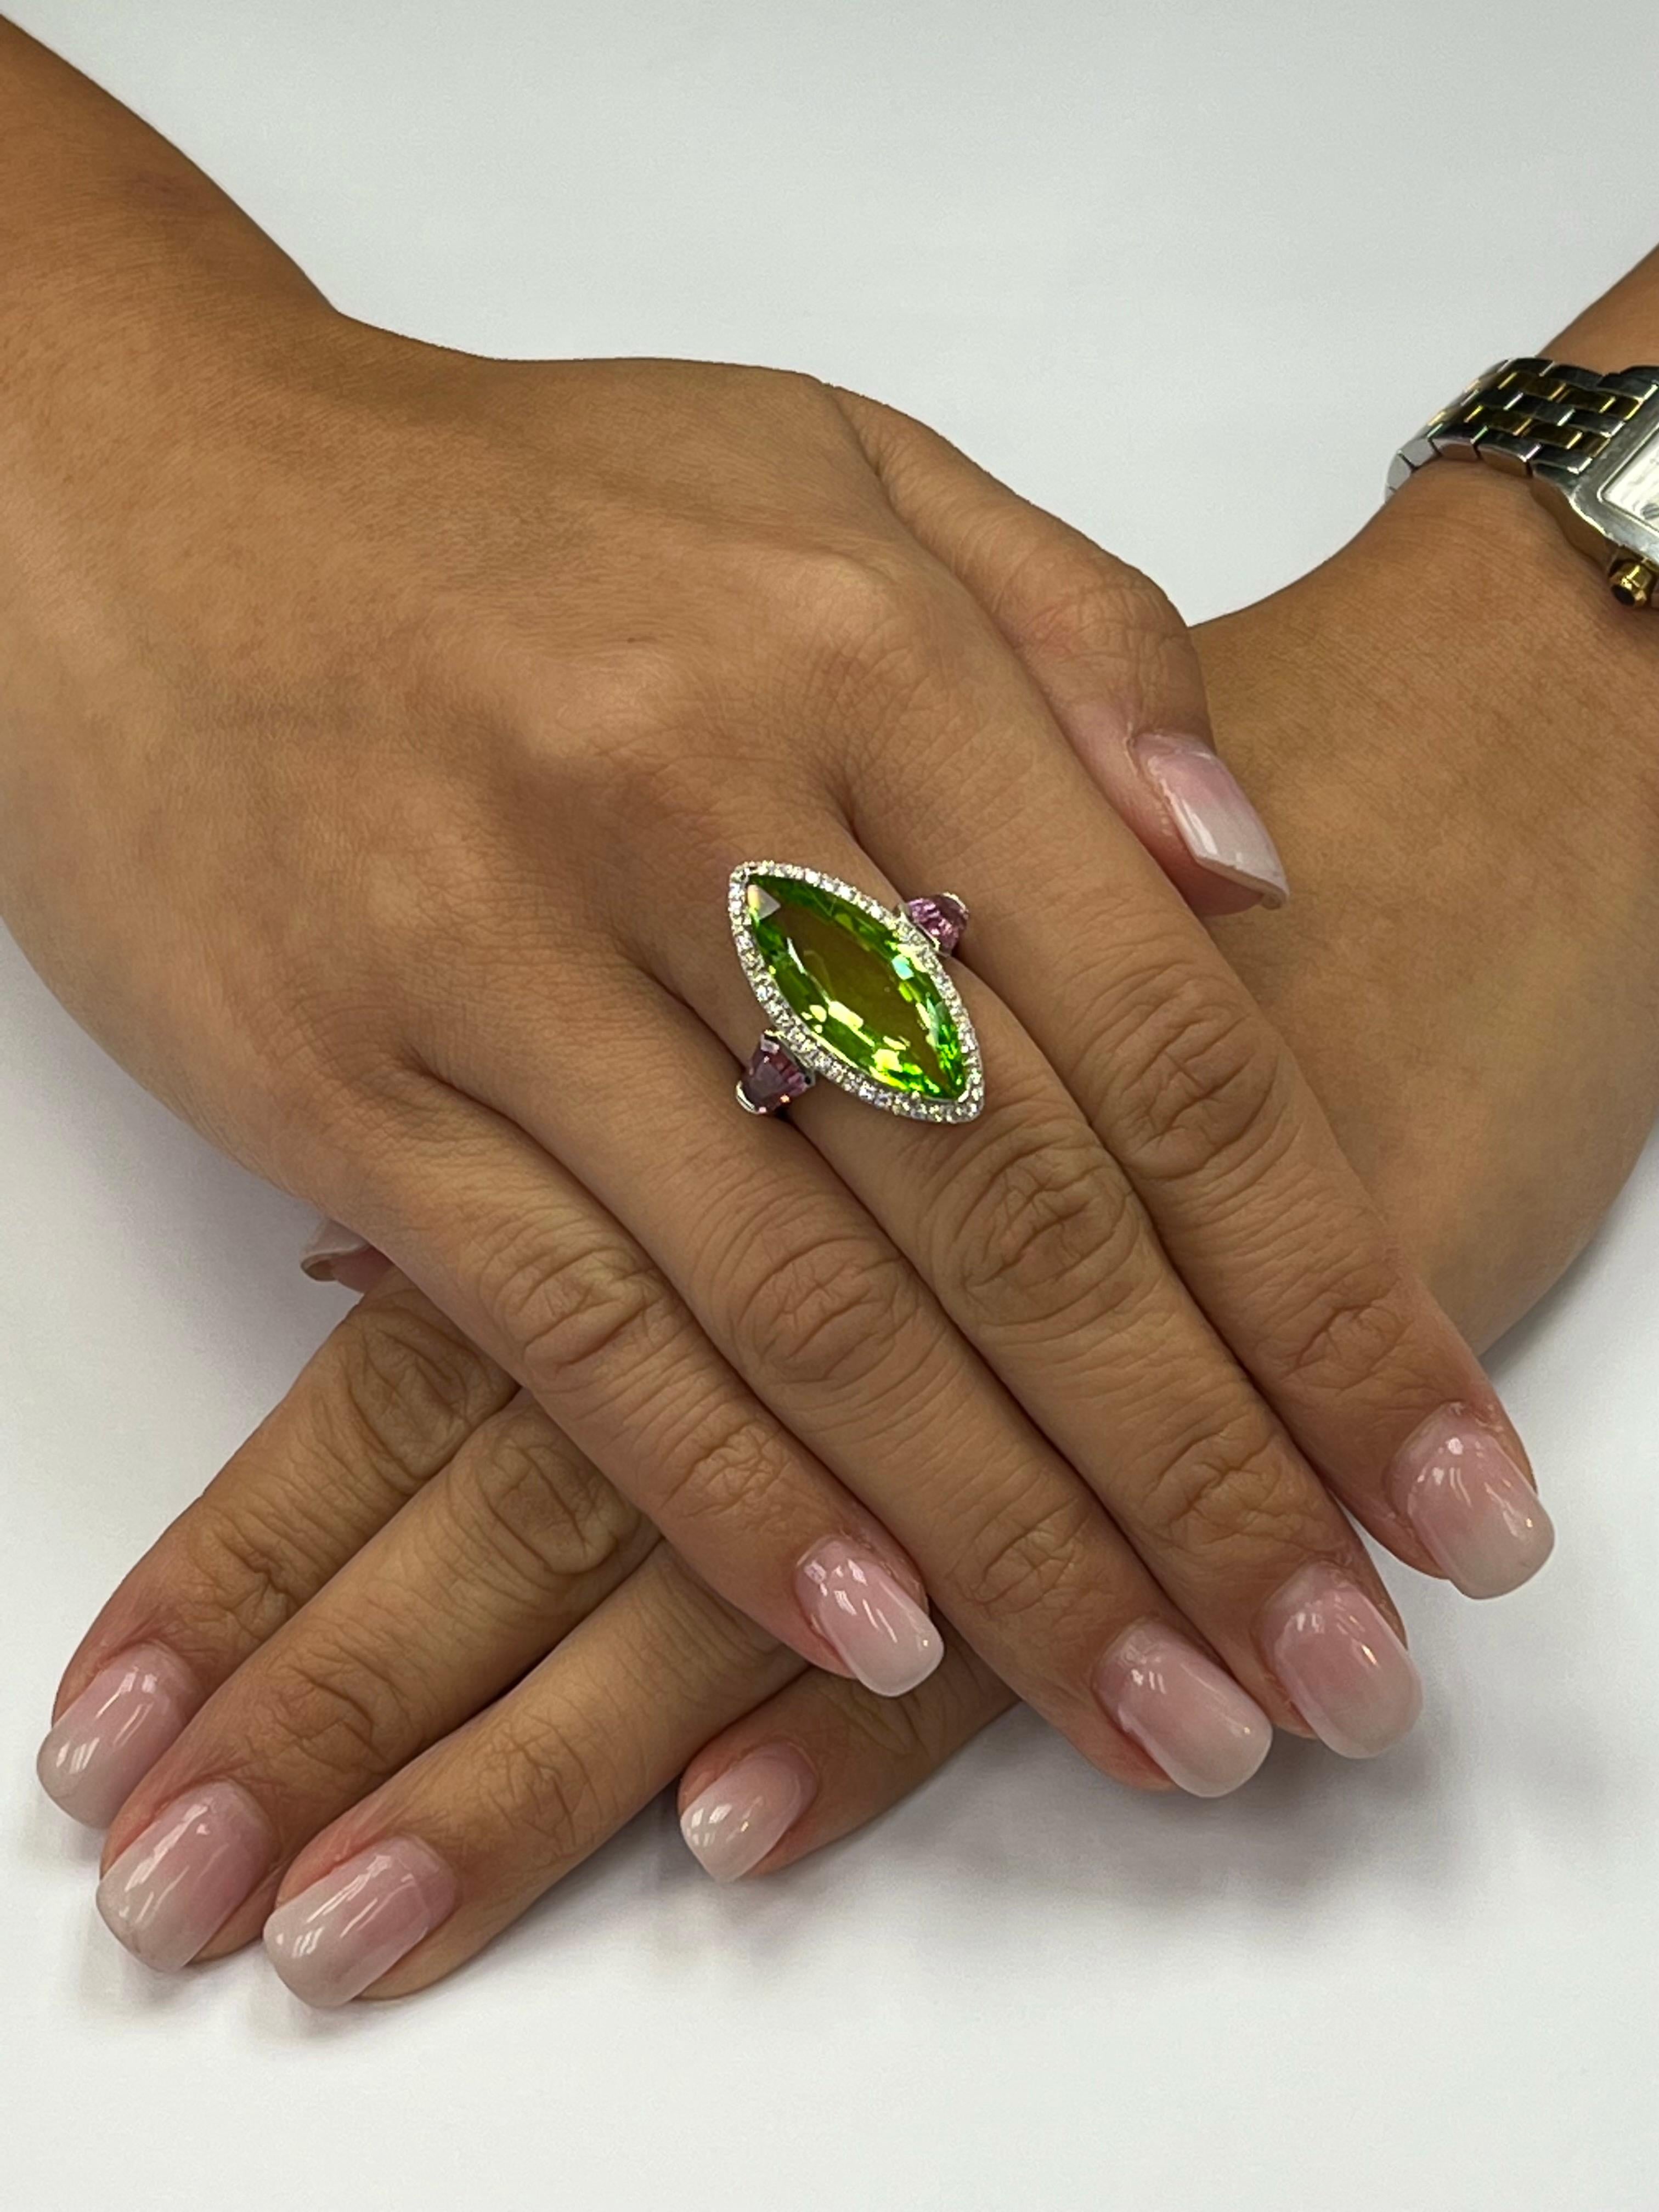 Please check out the HD video! This Peridot came straight from the source in Burma. This natural Peridot is not treated or enhanced. The ring is set in 18k white gold. The center Marquise shaped Peridot is 7.38cts. There are 2 special cut natural